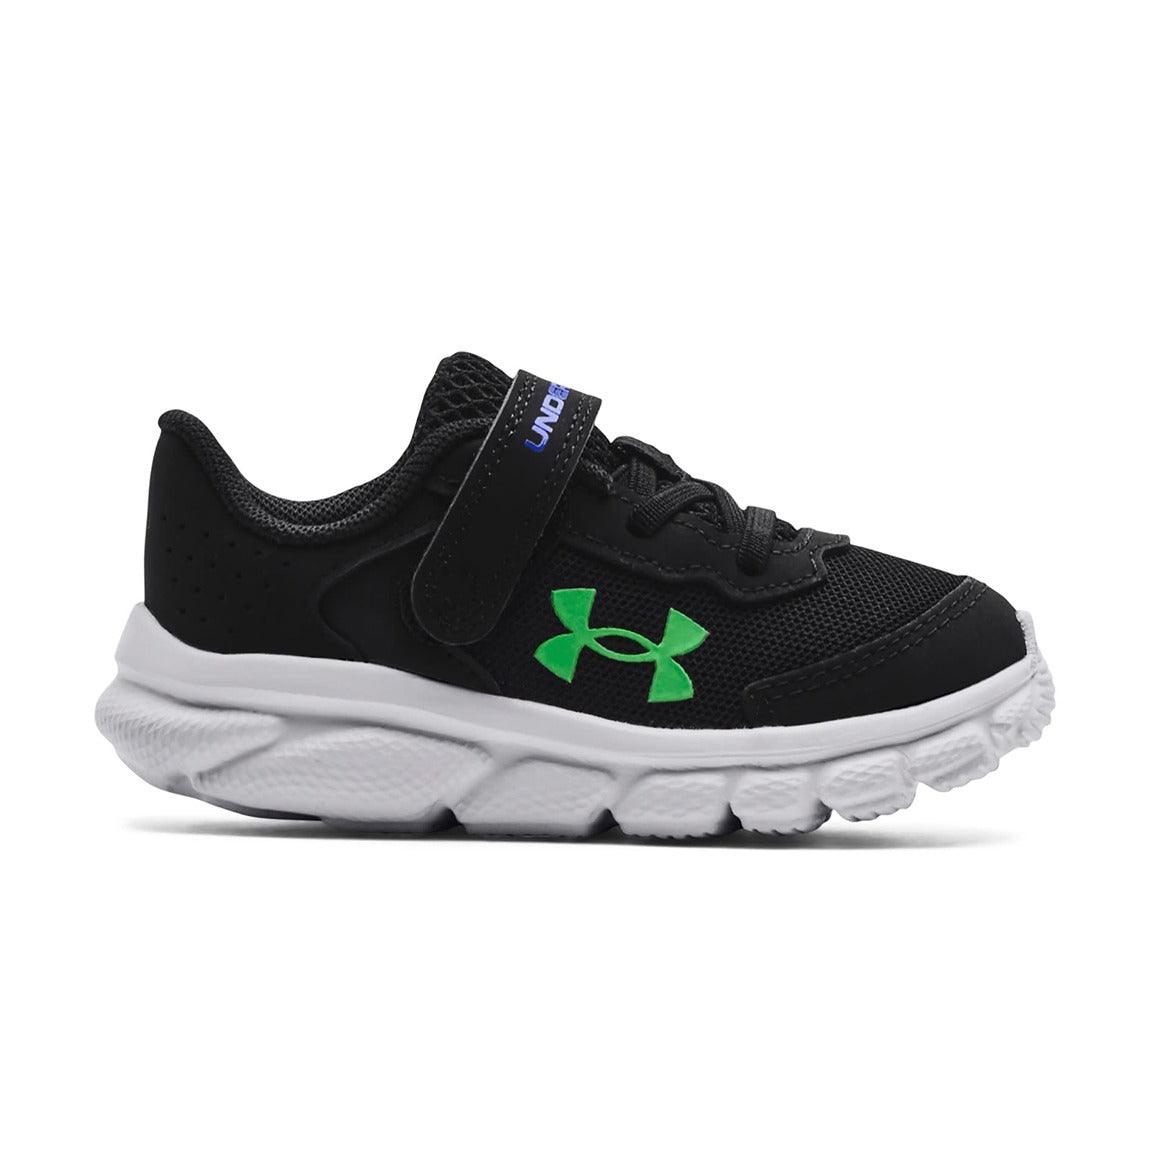 Boys' Infant Under Armour Assert 9 AC Running Shoes - Sports Excellence